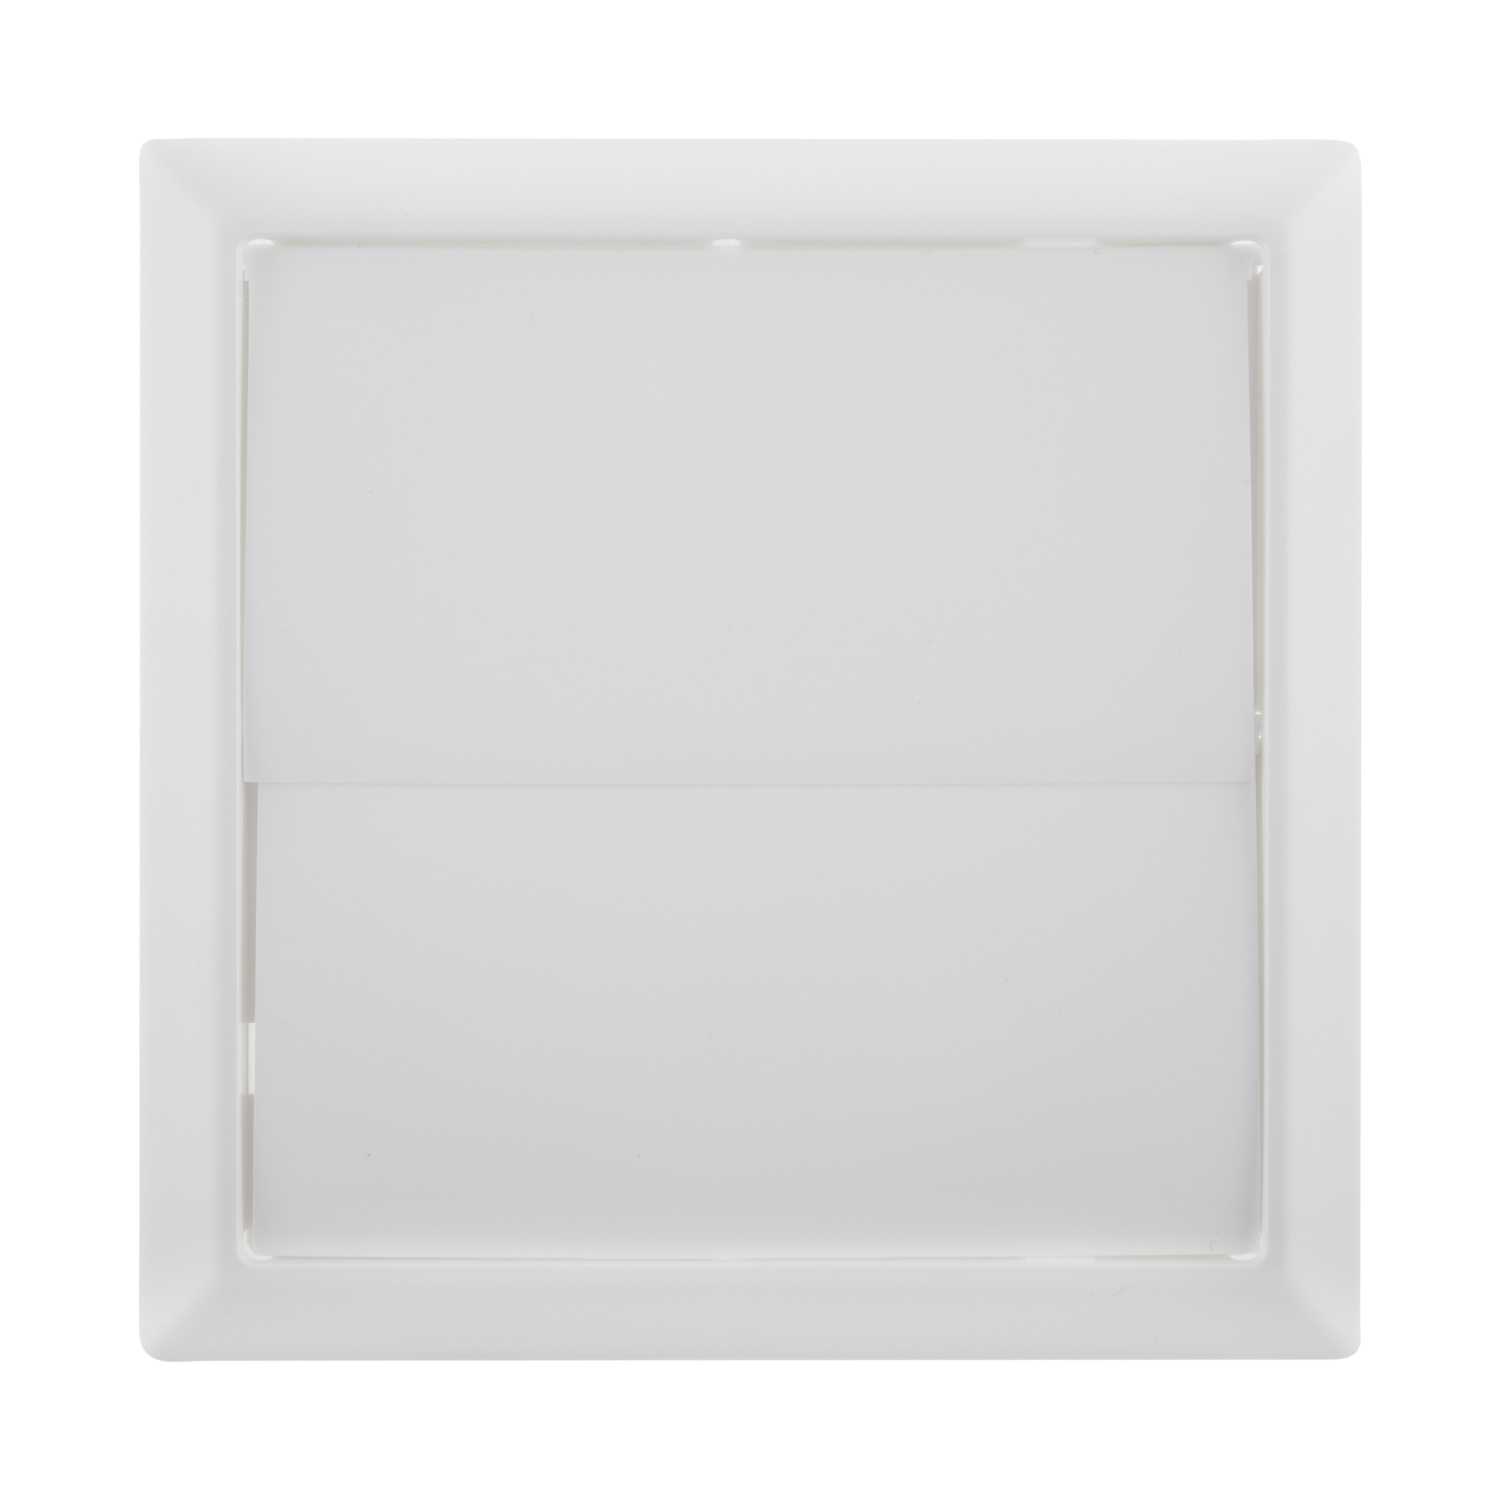 Oracstar Dual Fitting Exterior Louvre Wall Vent Image 2